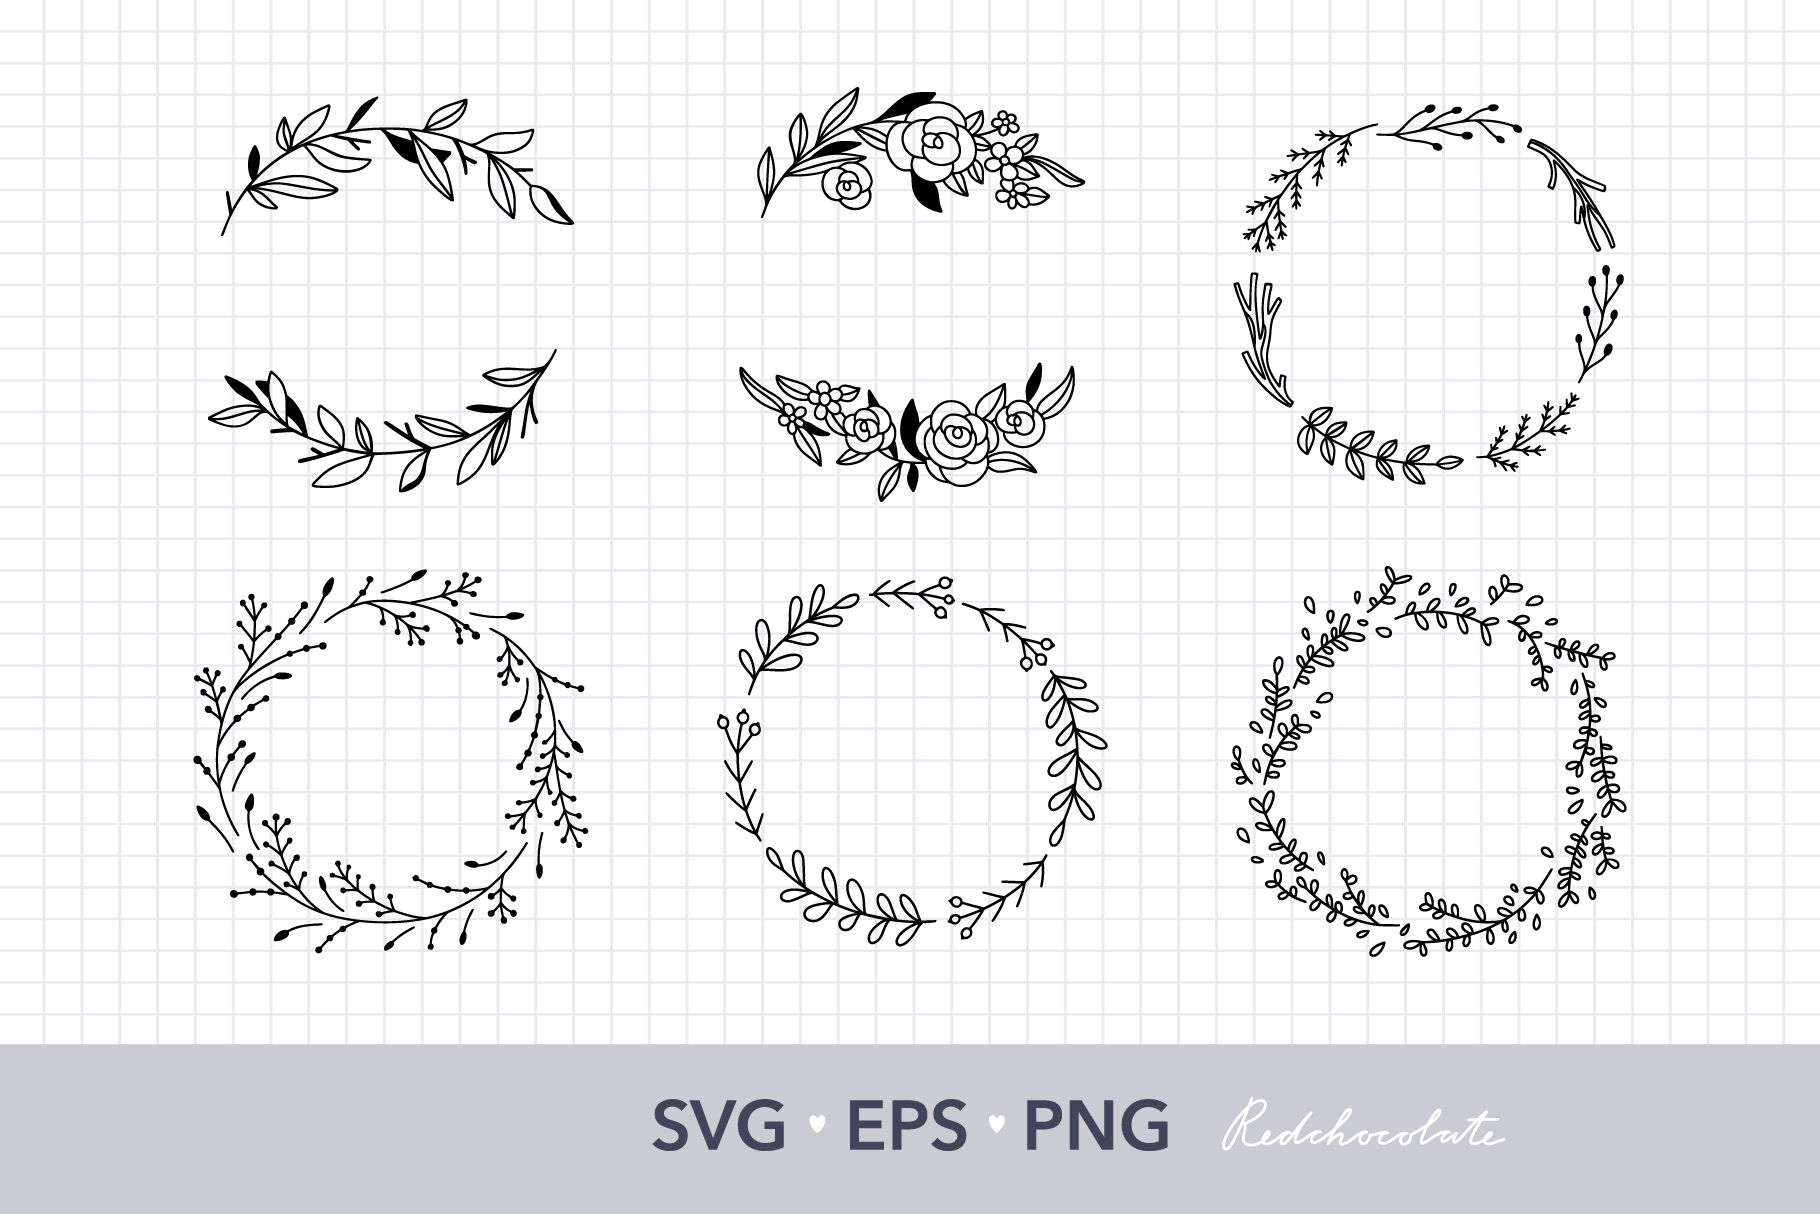 Download Floral Wreath Svg Clipart Set Hand Drawn Wreath Clipart Collection By Redchocolate Illustration Thehungryjpeg Com